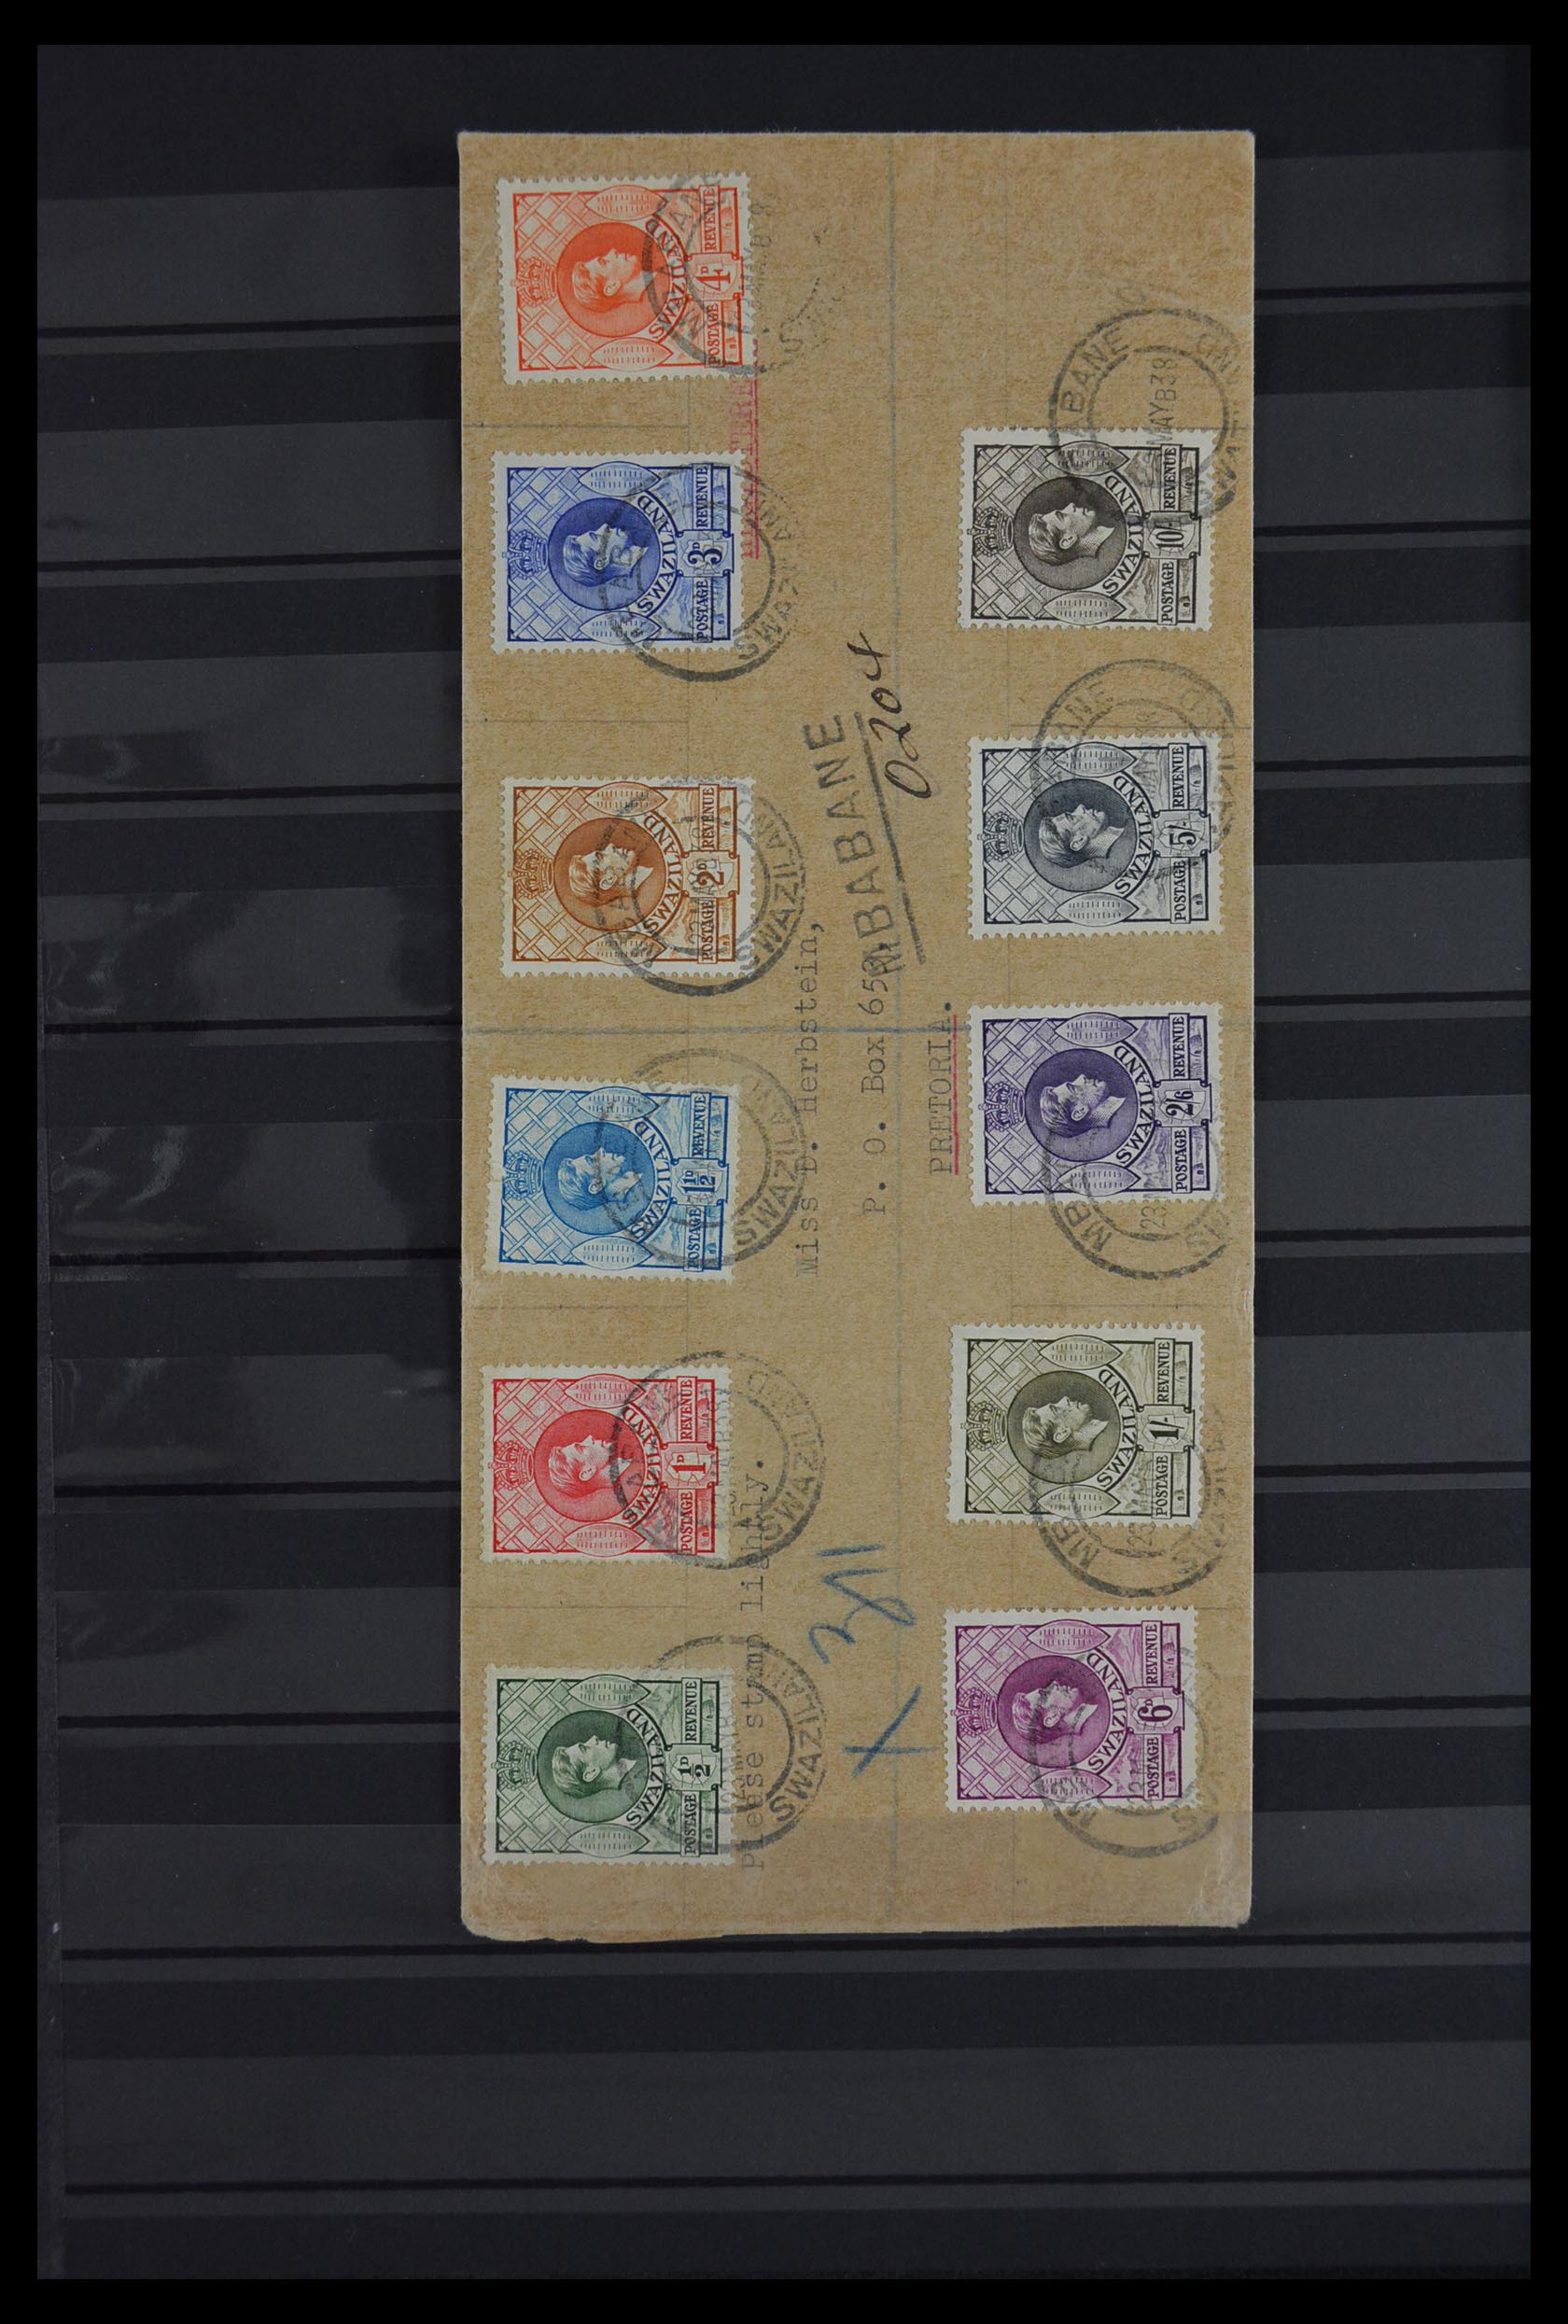 29946 008 - 29946 Great Britain and colonies 1880-1938.